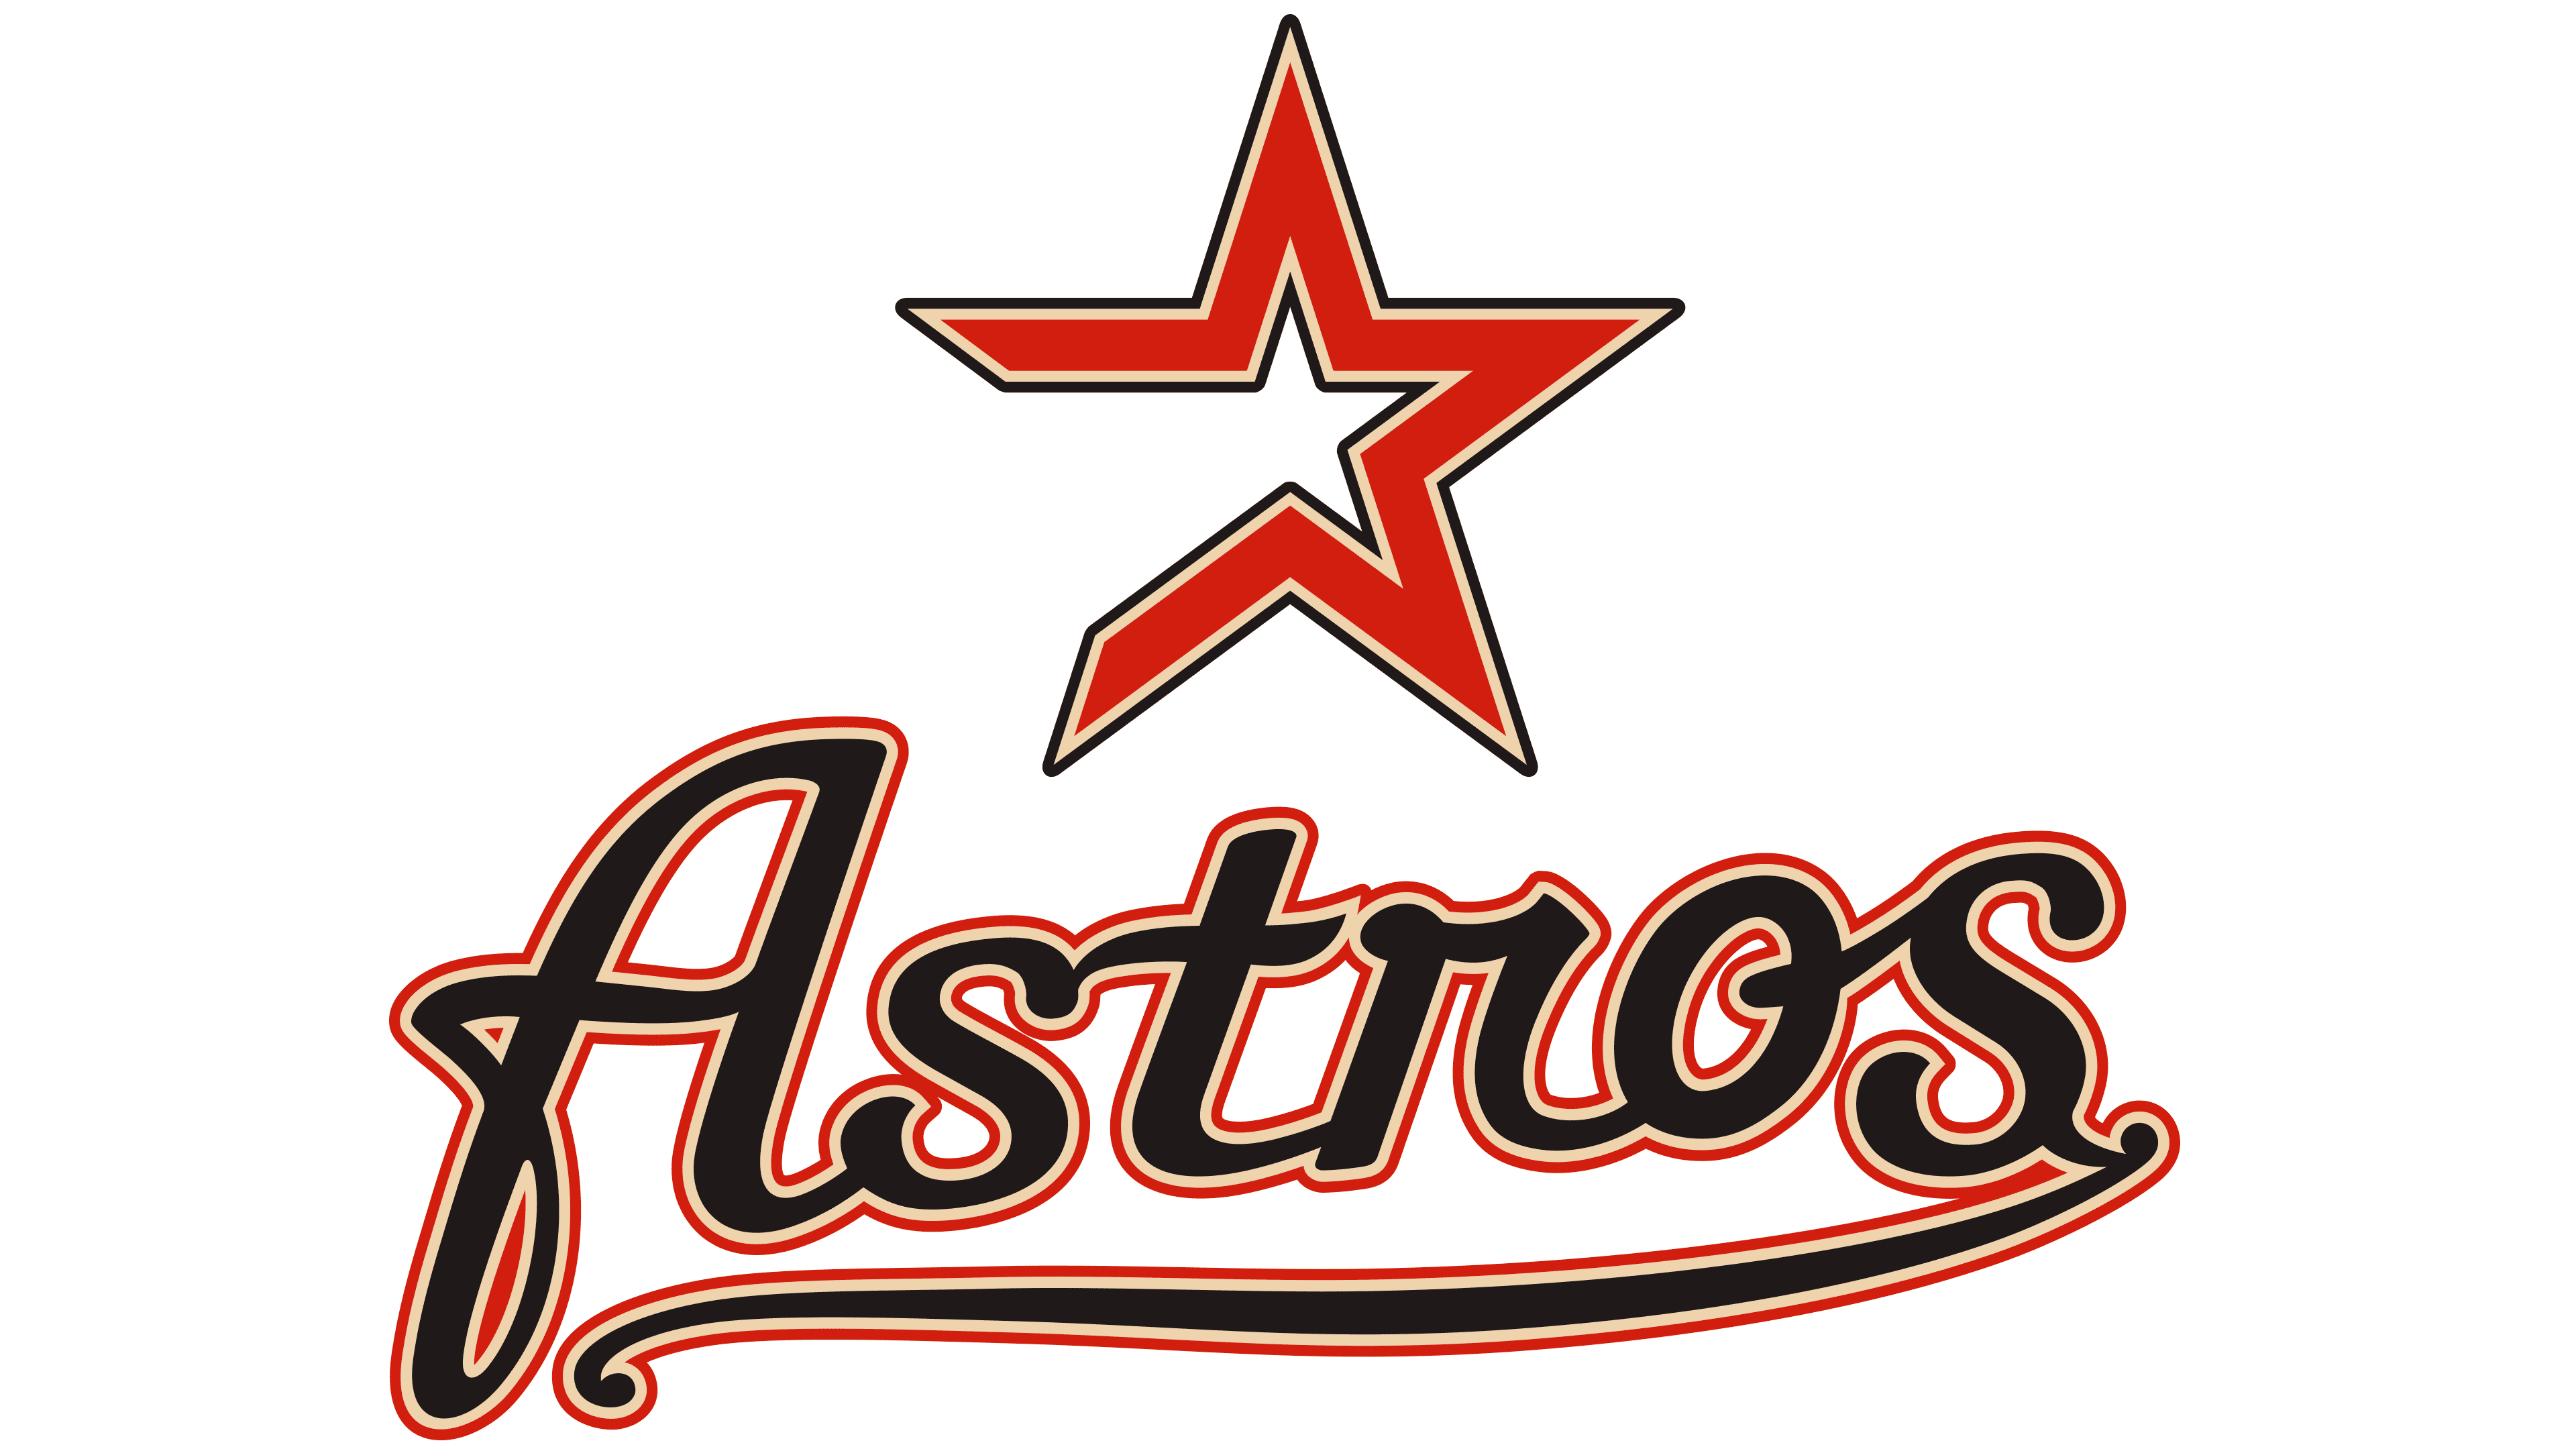 Astro PNG - Houston Astros, Houston Astros Logo, Astros Logo, Astro  Orbiter, Astros Color, Houston Astros Orbit, Never Settle Astros, Astros  Champions, Astros Baseball, Astros Font, Astros Wallpaper, Astros Coloring  Pages. 